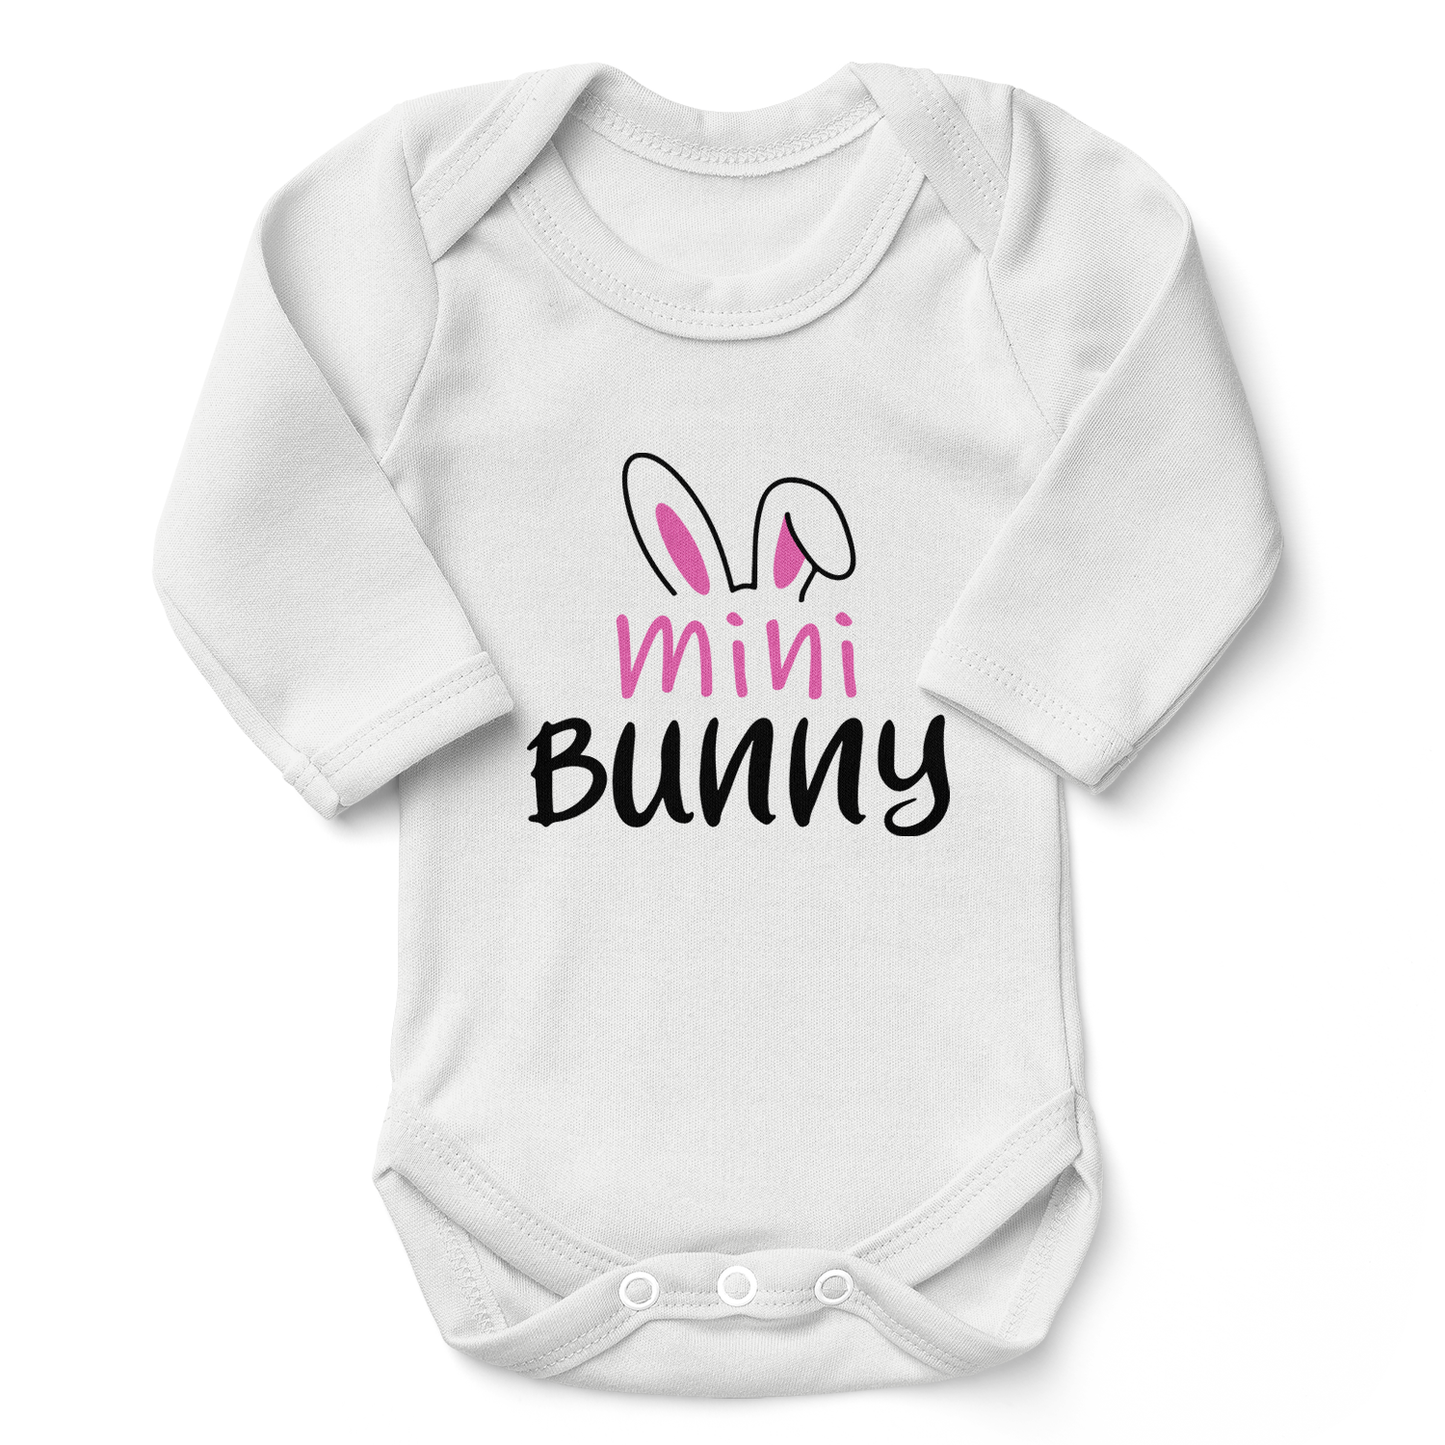 Endanzoo Matching Mom & Baby Organic Outfits - Easter Bunny